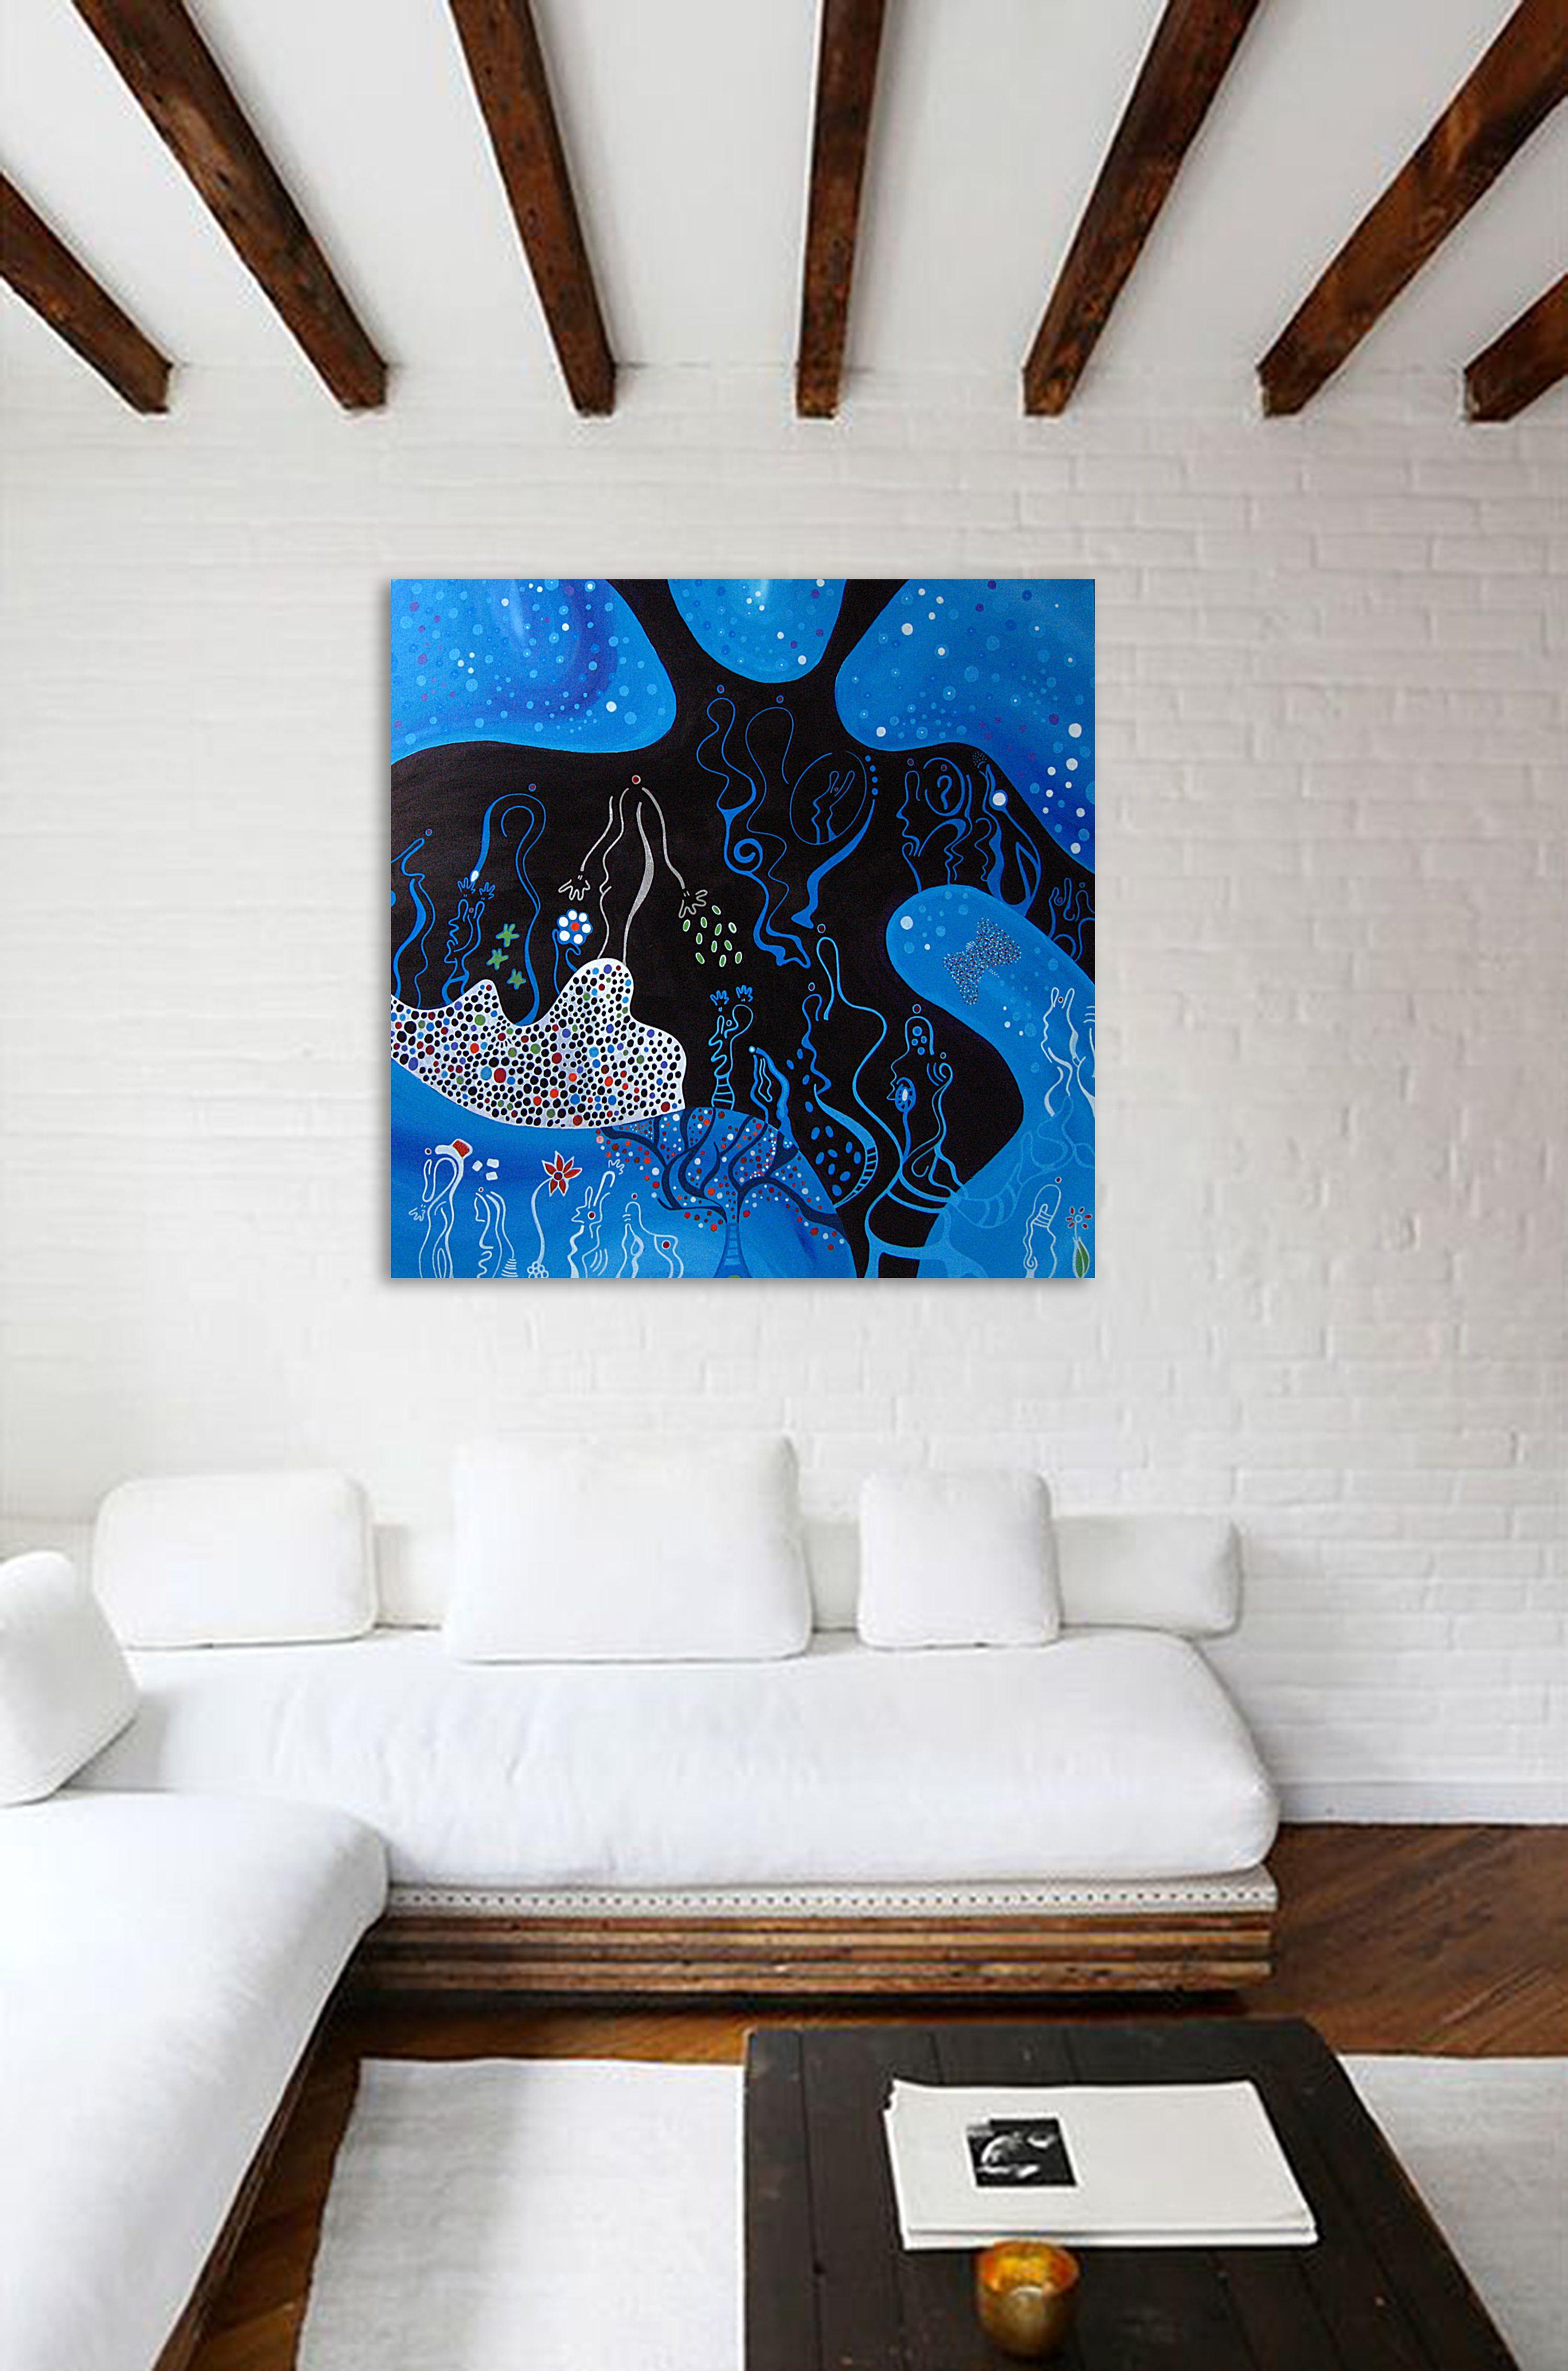 The celebration, Painting, Acrylic on Canvas - Blue Abstract Painting by Nathalie Gribinski